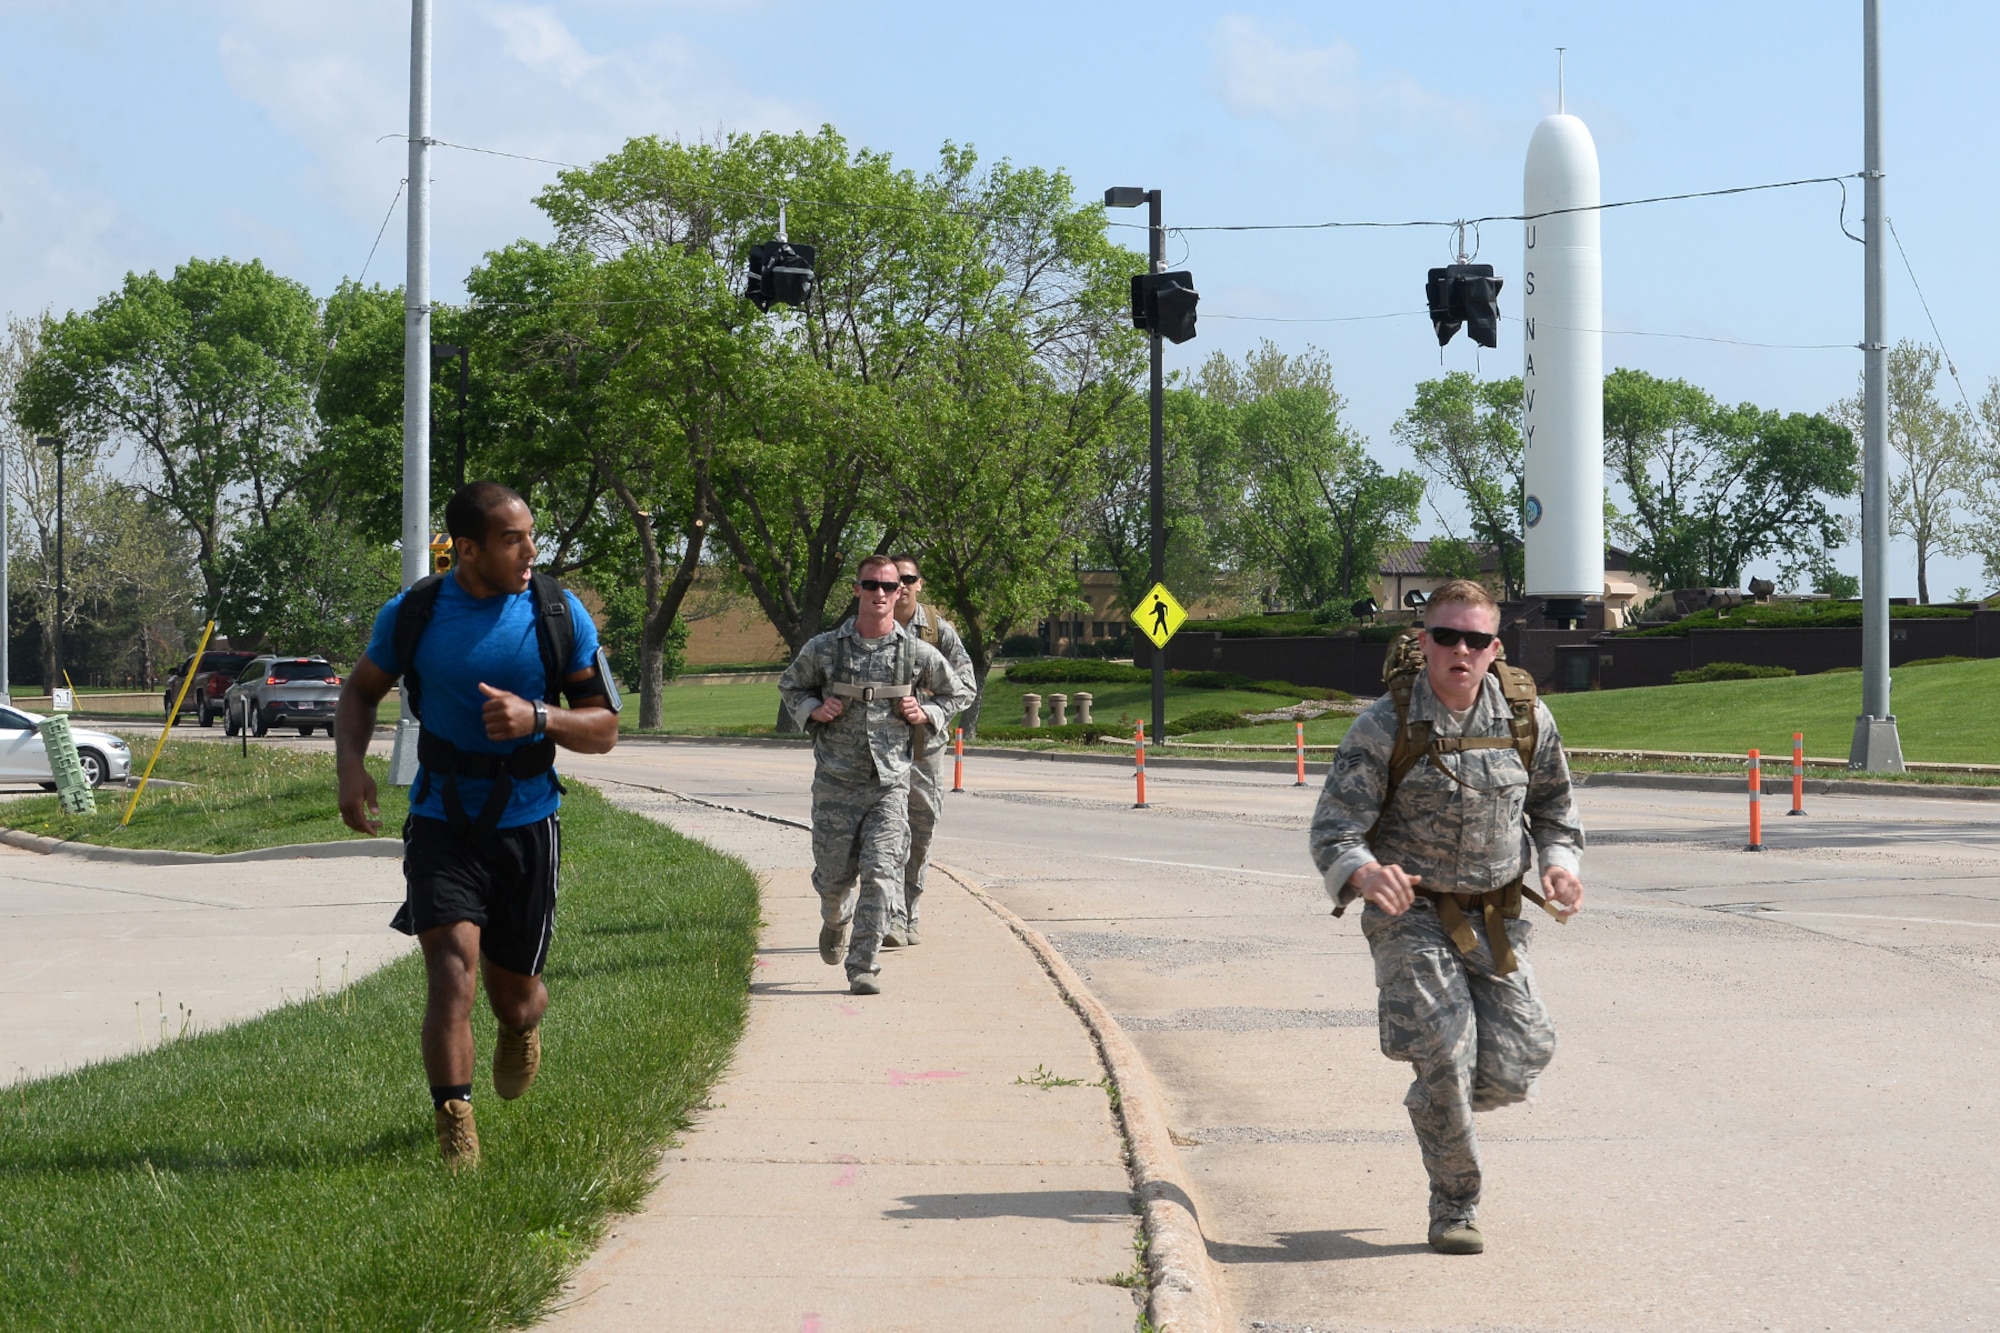 55th Security Forces Squadron Airmen approach the finish line during a ruck march challenge May 14, 2018, at Offutt Air Force, Nebraska. Team two ran and walked 2 miles from the the Patriot Club parking lot to Peacekeeper Drive in 38 minutes and 25 seconds to earn first place in this challenge. (U.S. Air Force photo by Charles J. Haymond)